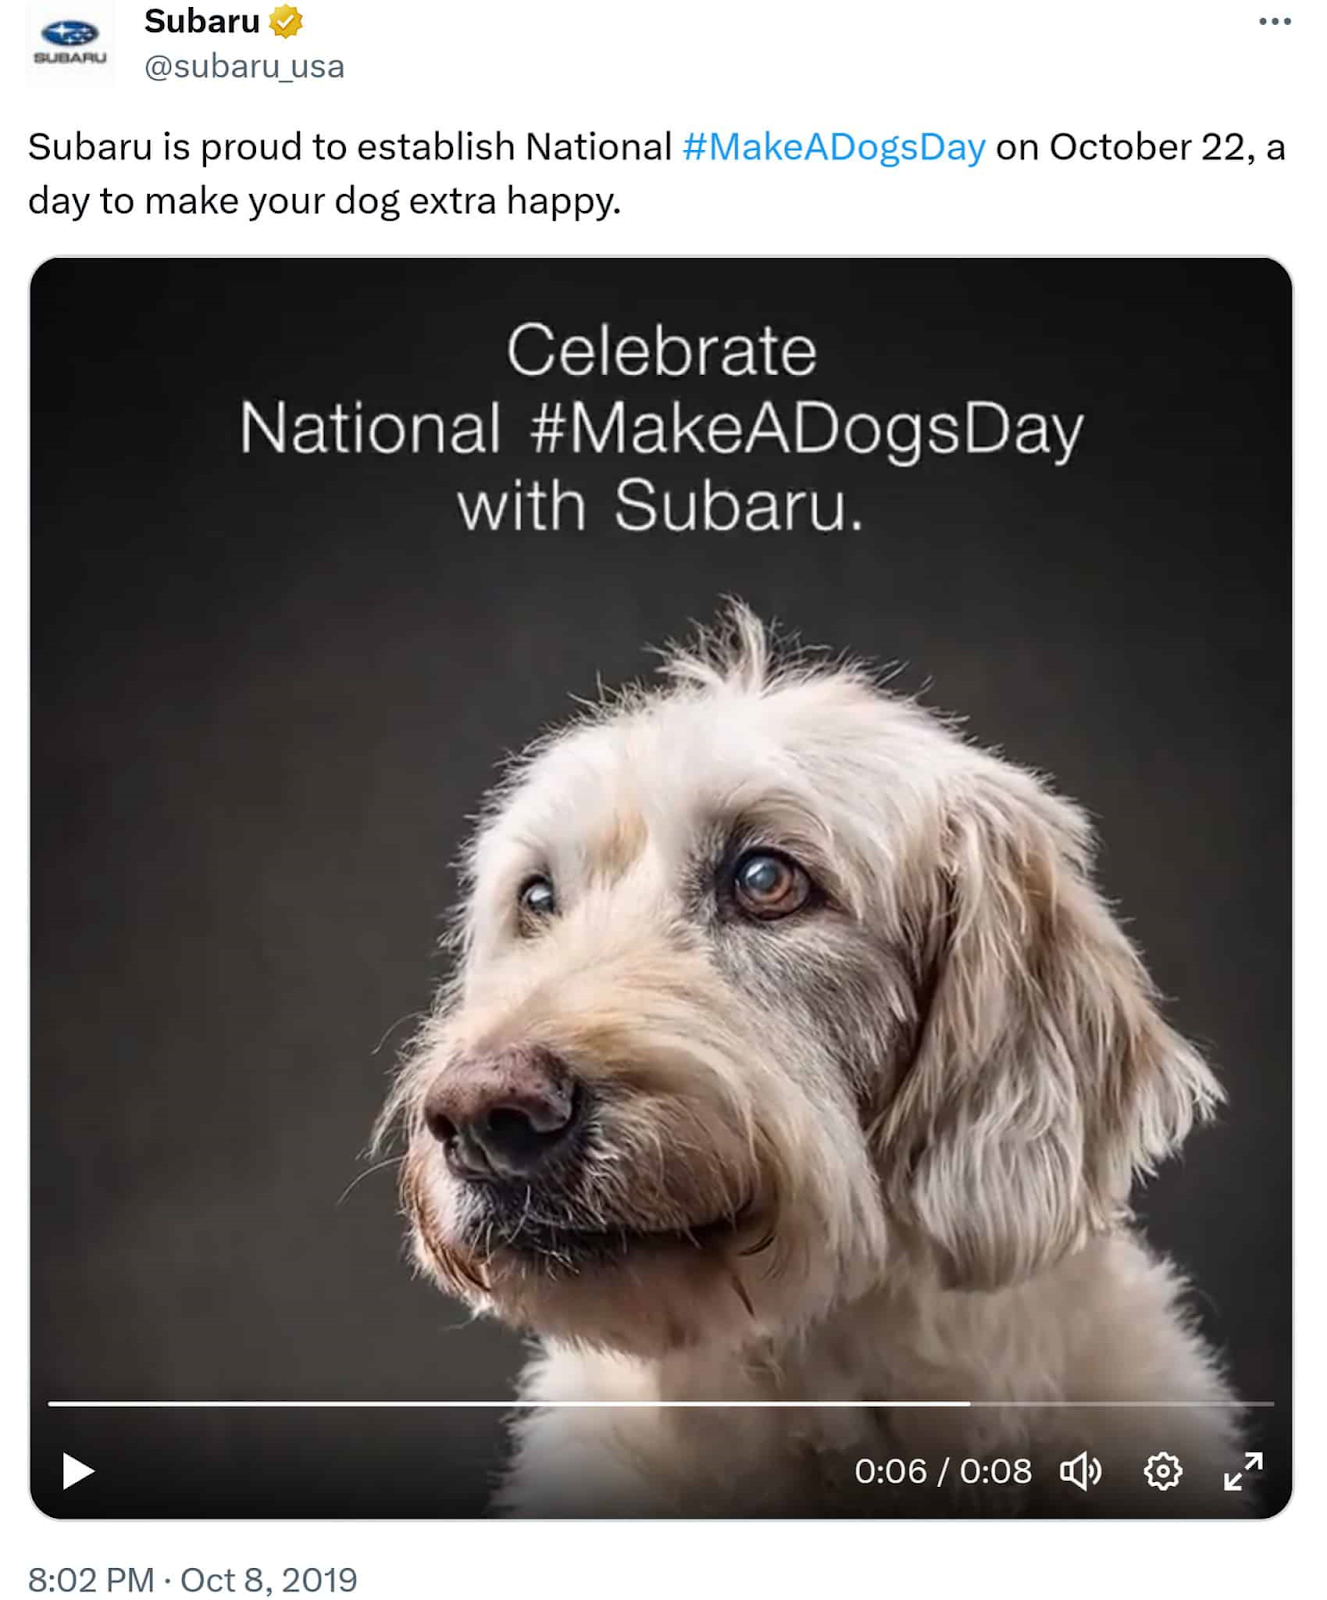 Subaru's ad inviting pet owners to celebrate National #MakeADogsDay with the brand